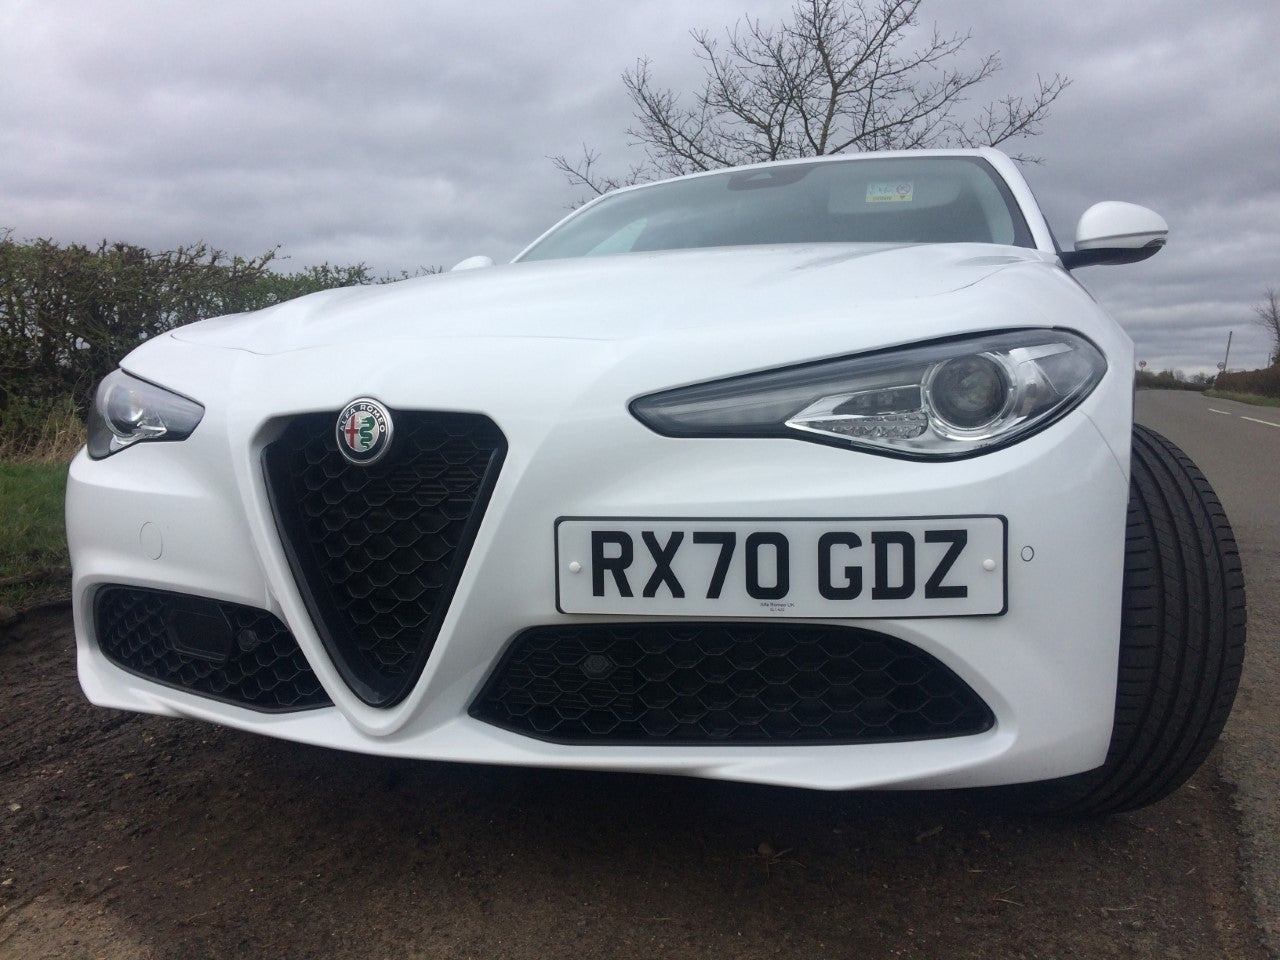 Sing my heart: if you’ve got the money, the Giulia can make your life complete